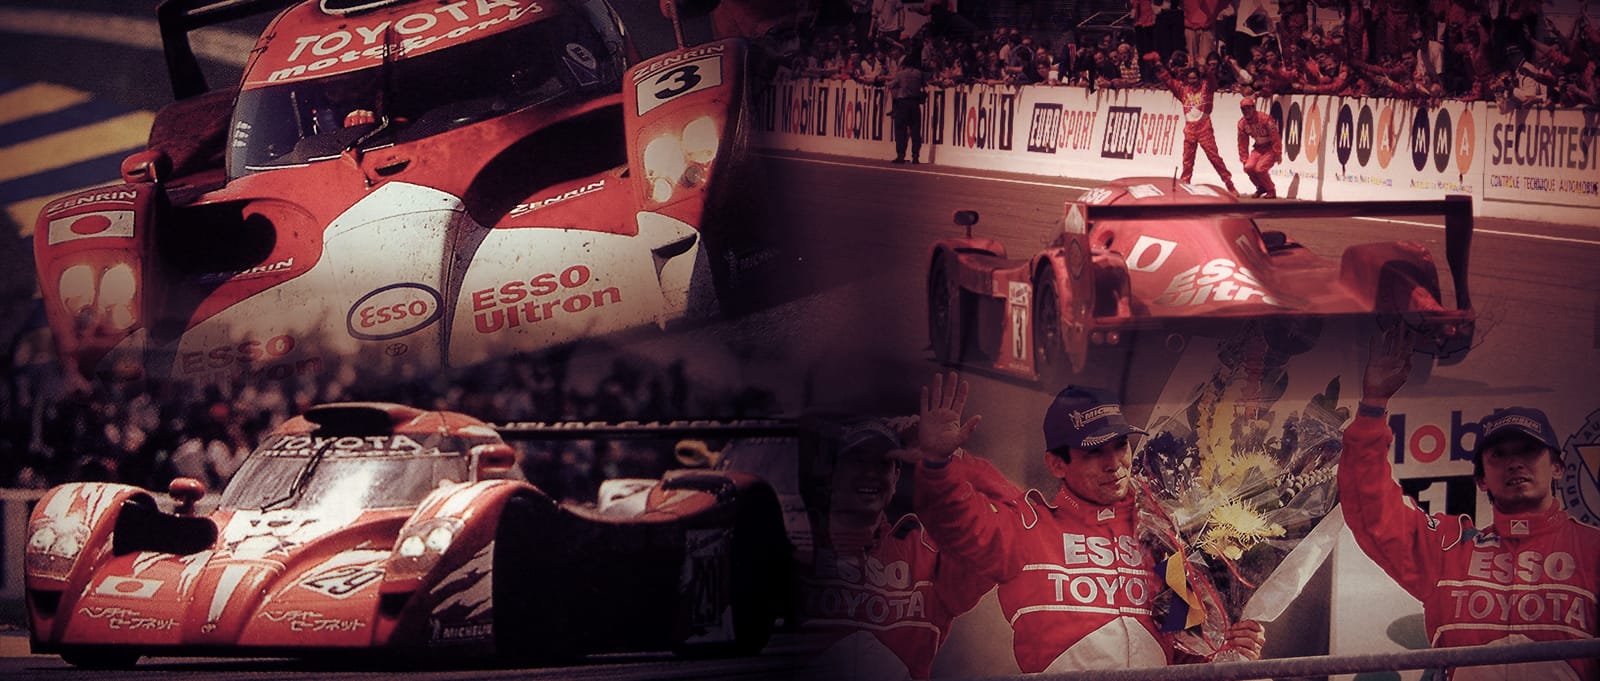 1995-1999 The TS020 with Three Japanese Drivers Finishes 2nd a Step from Victory 